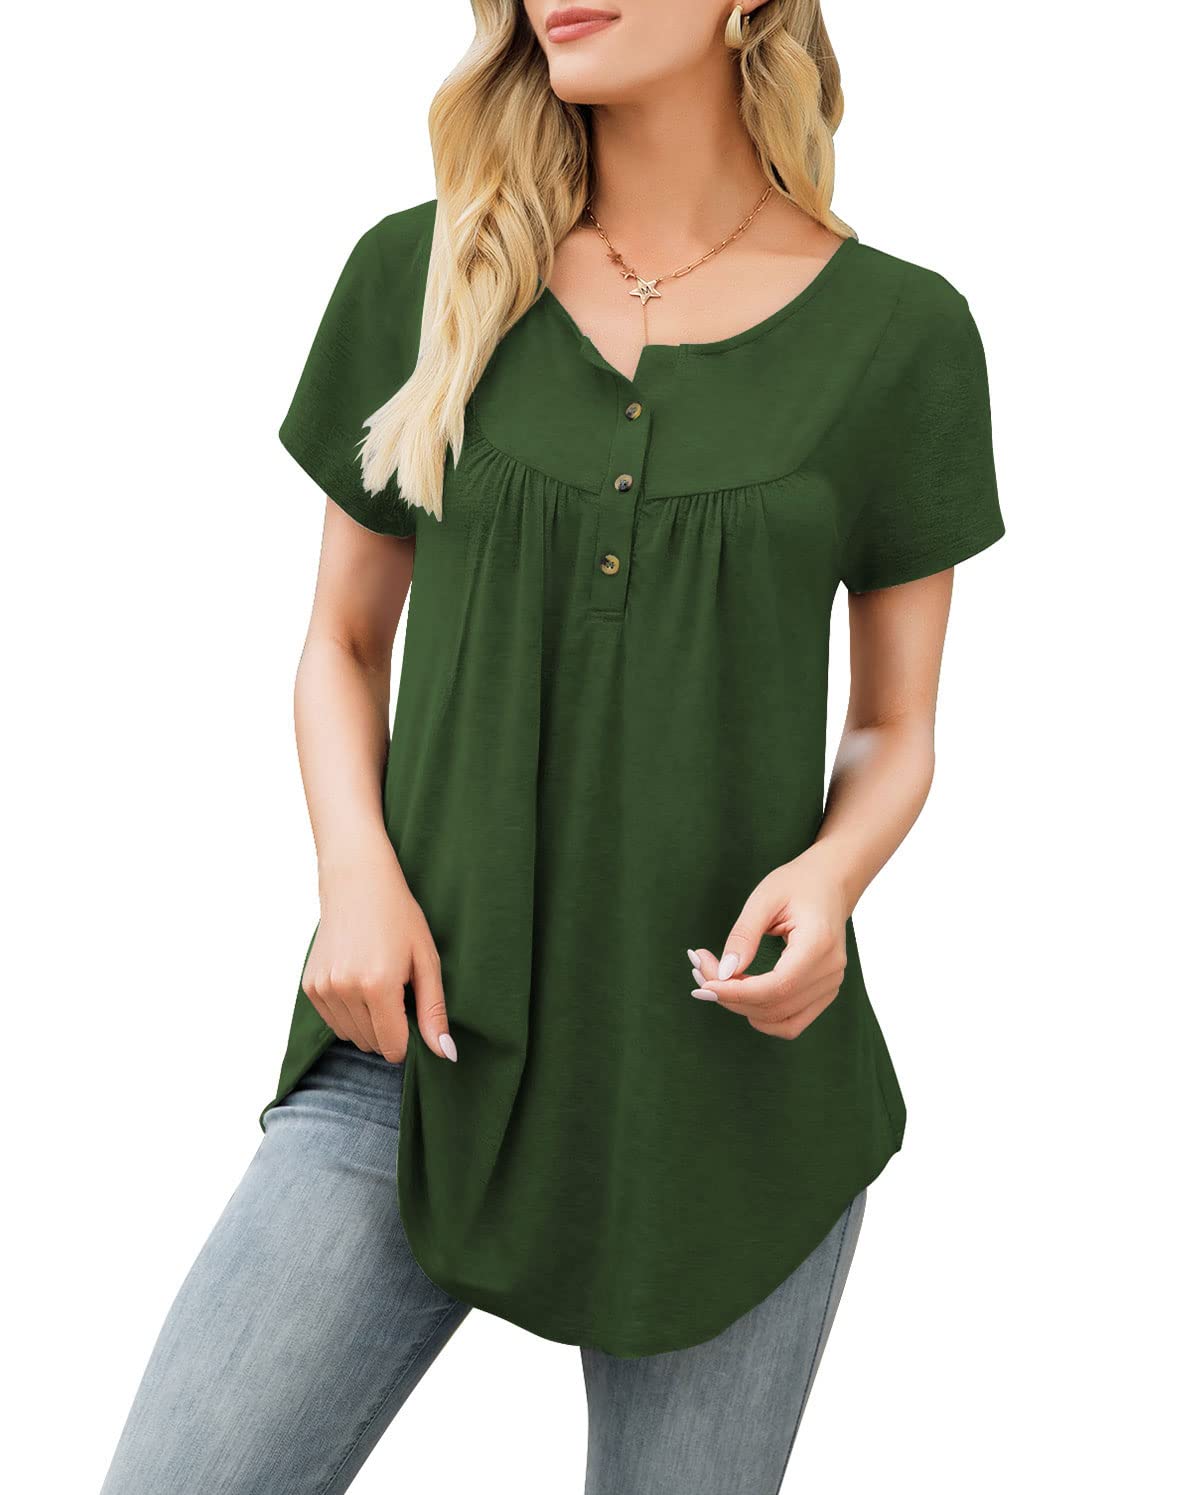 AMcLOS Womens Tops Floral V Neck T-Shirts Swing Blouses Button up Tunic casual Flowy Summer Soft Short Sleeve(M, Army green)